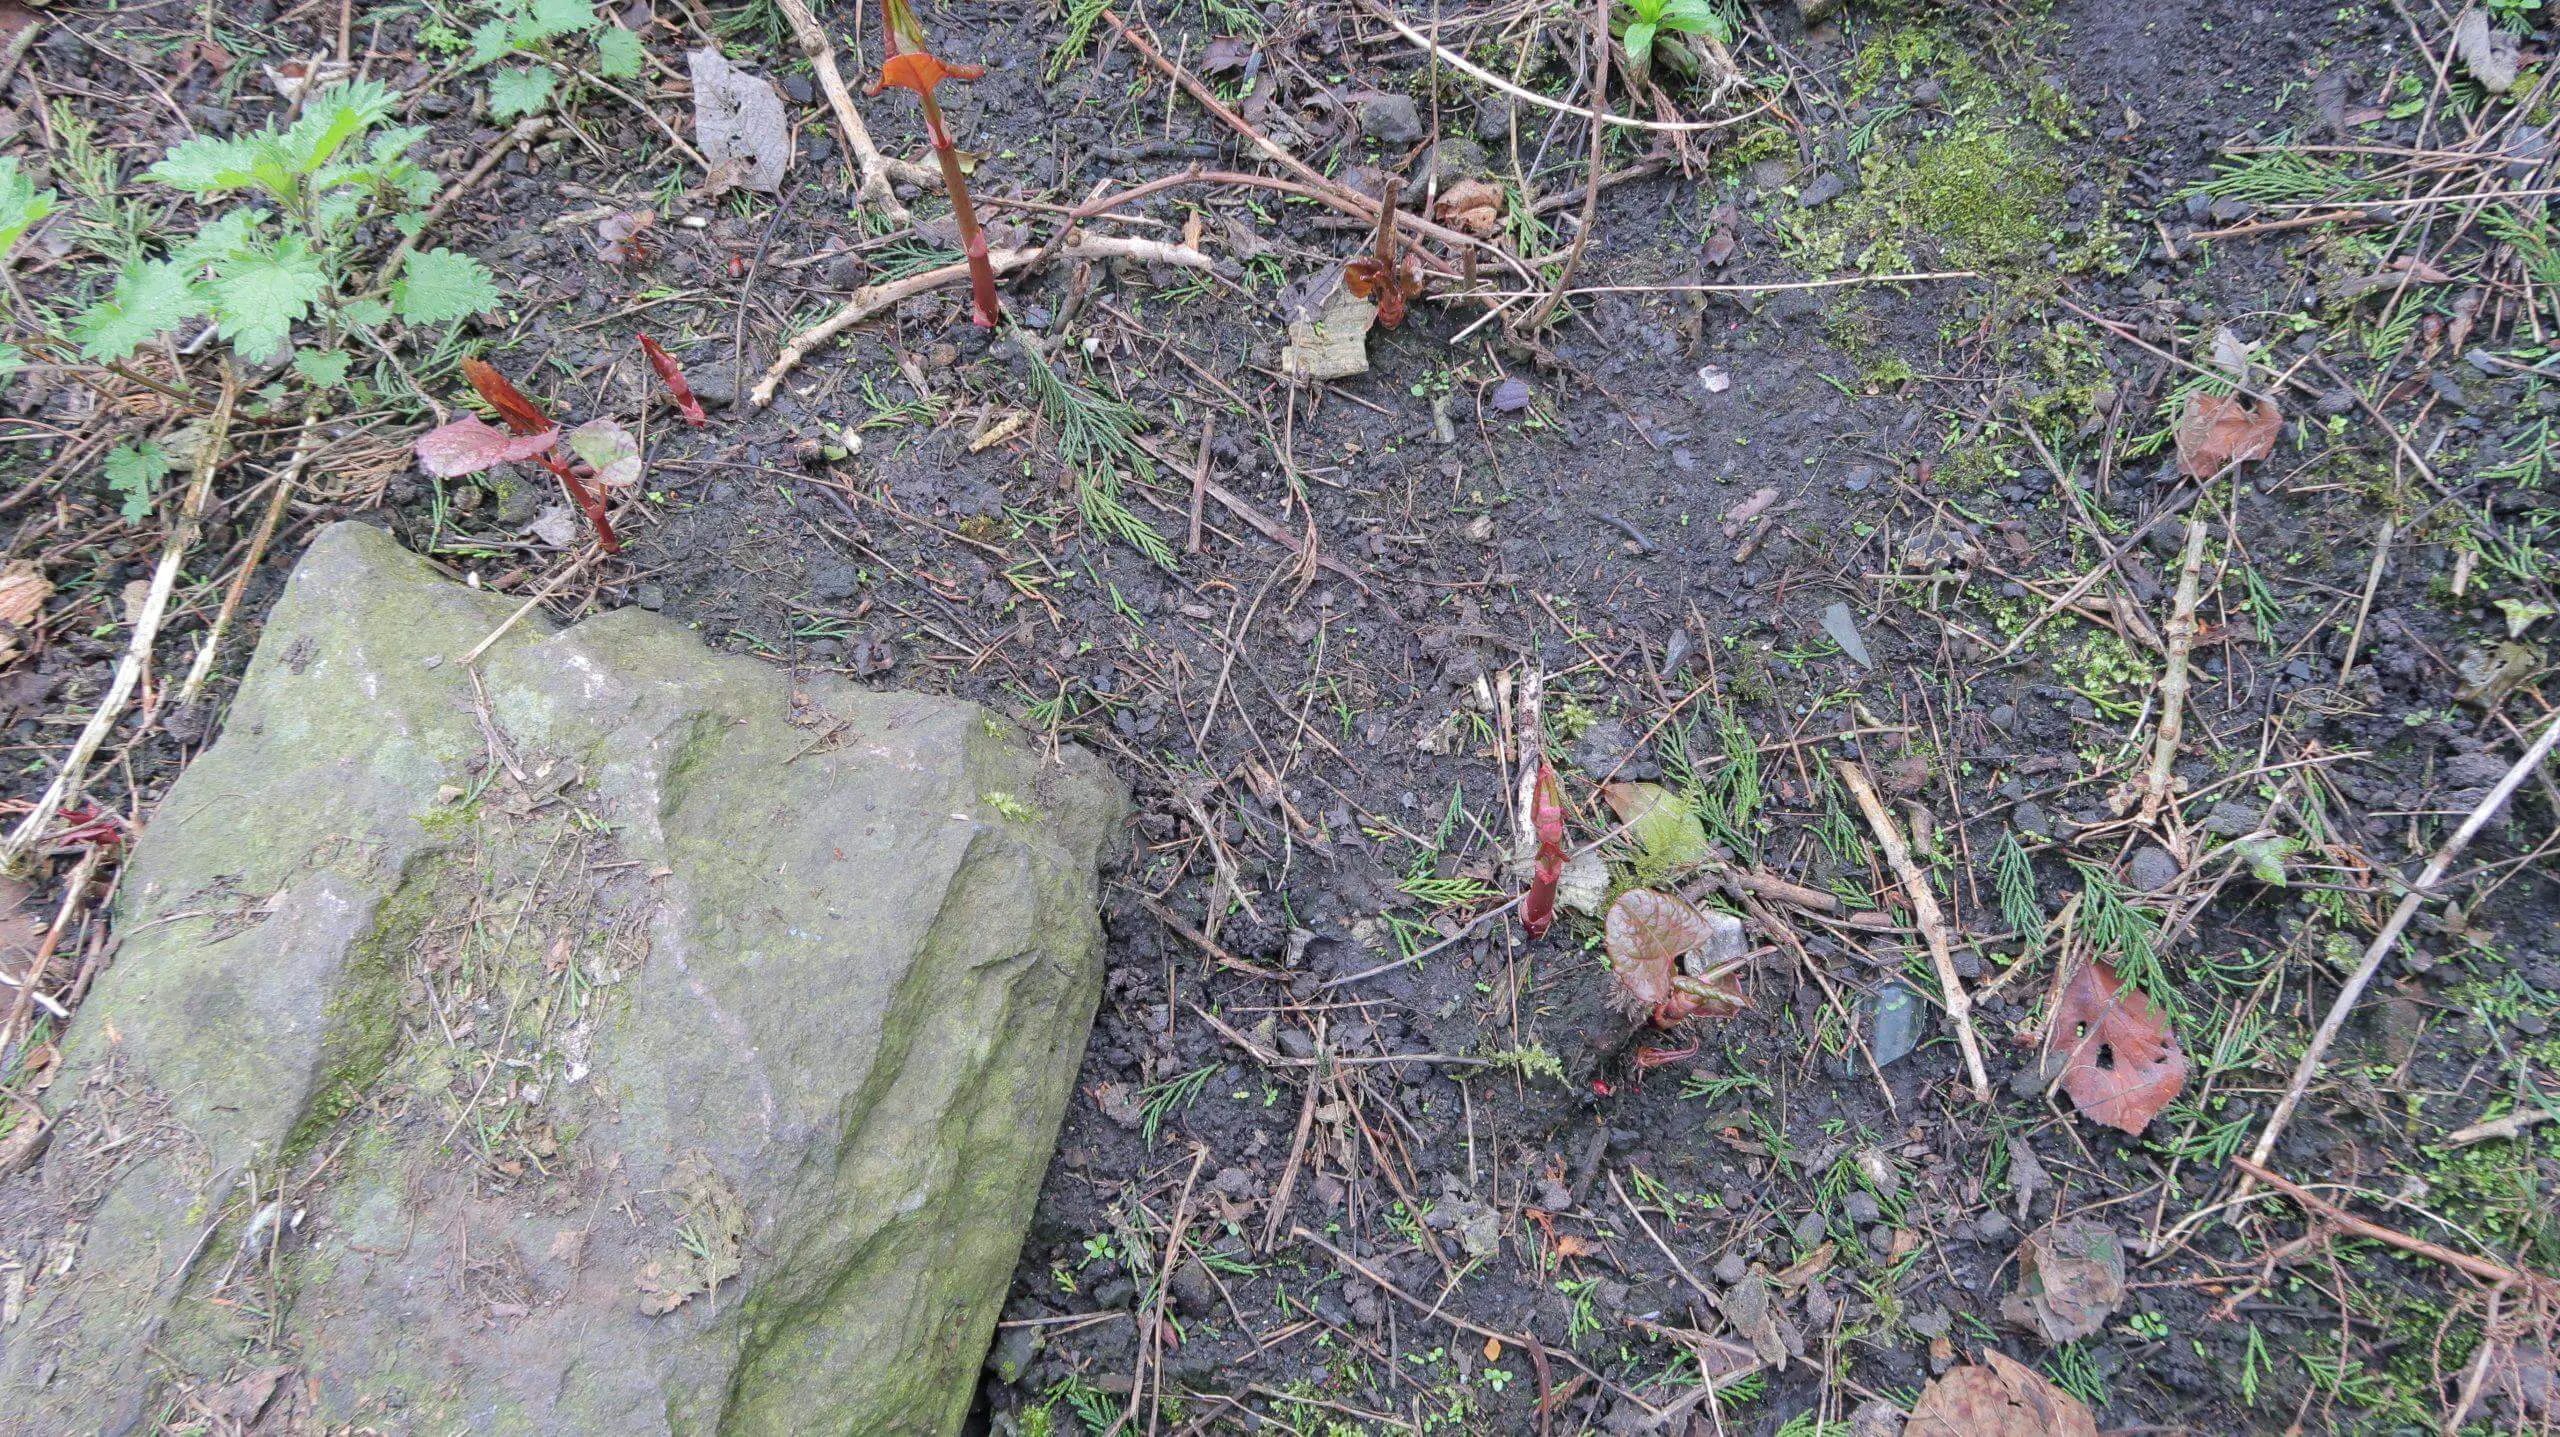 Early Japanese knotweed shoots begin to grow from late March across open ground from seeds spread the year before